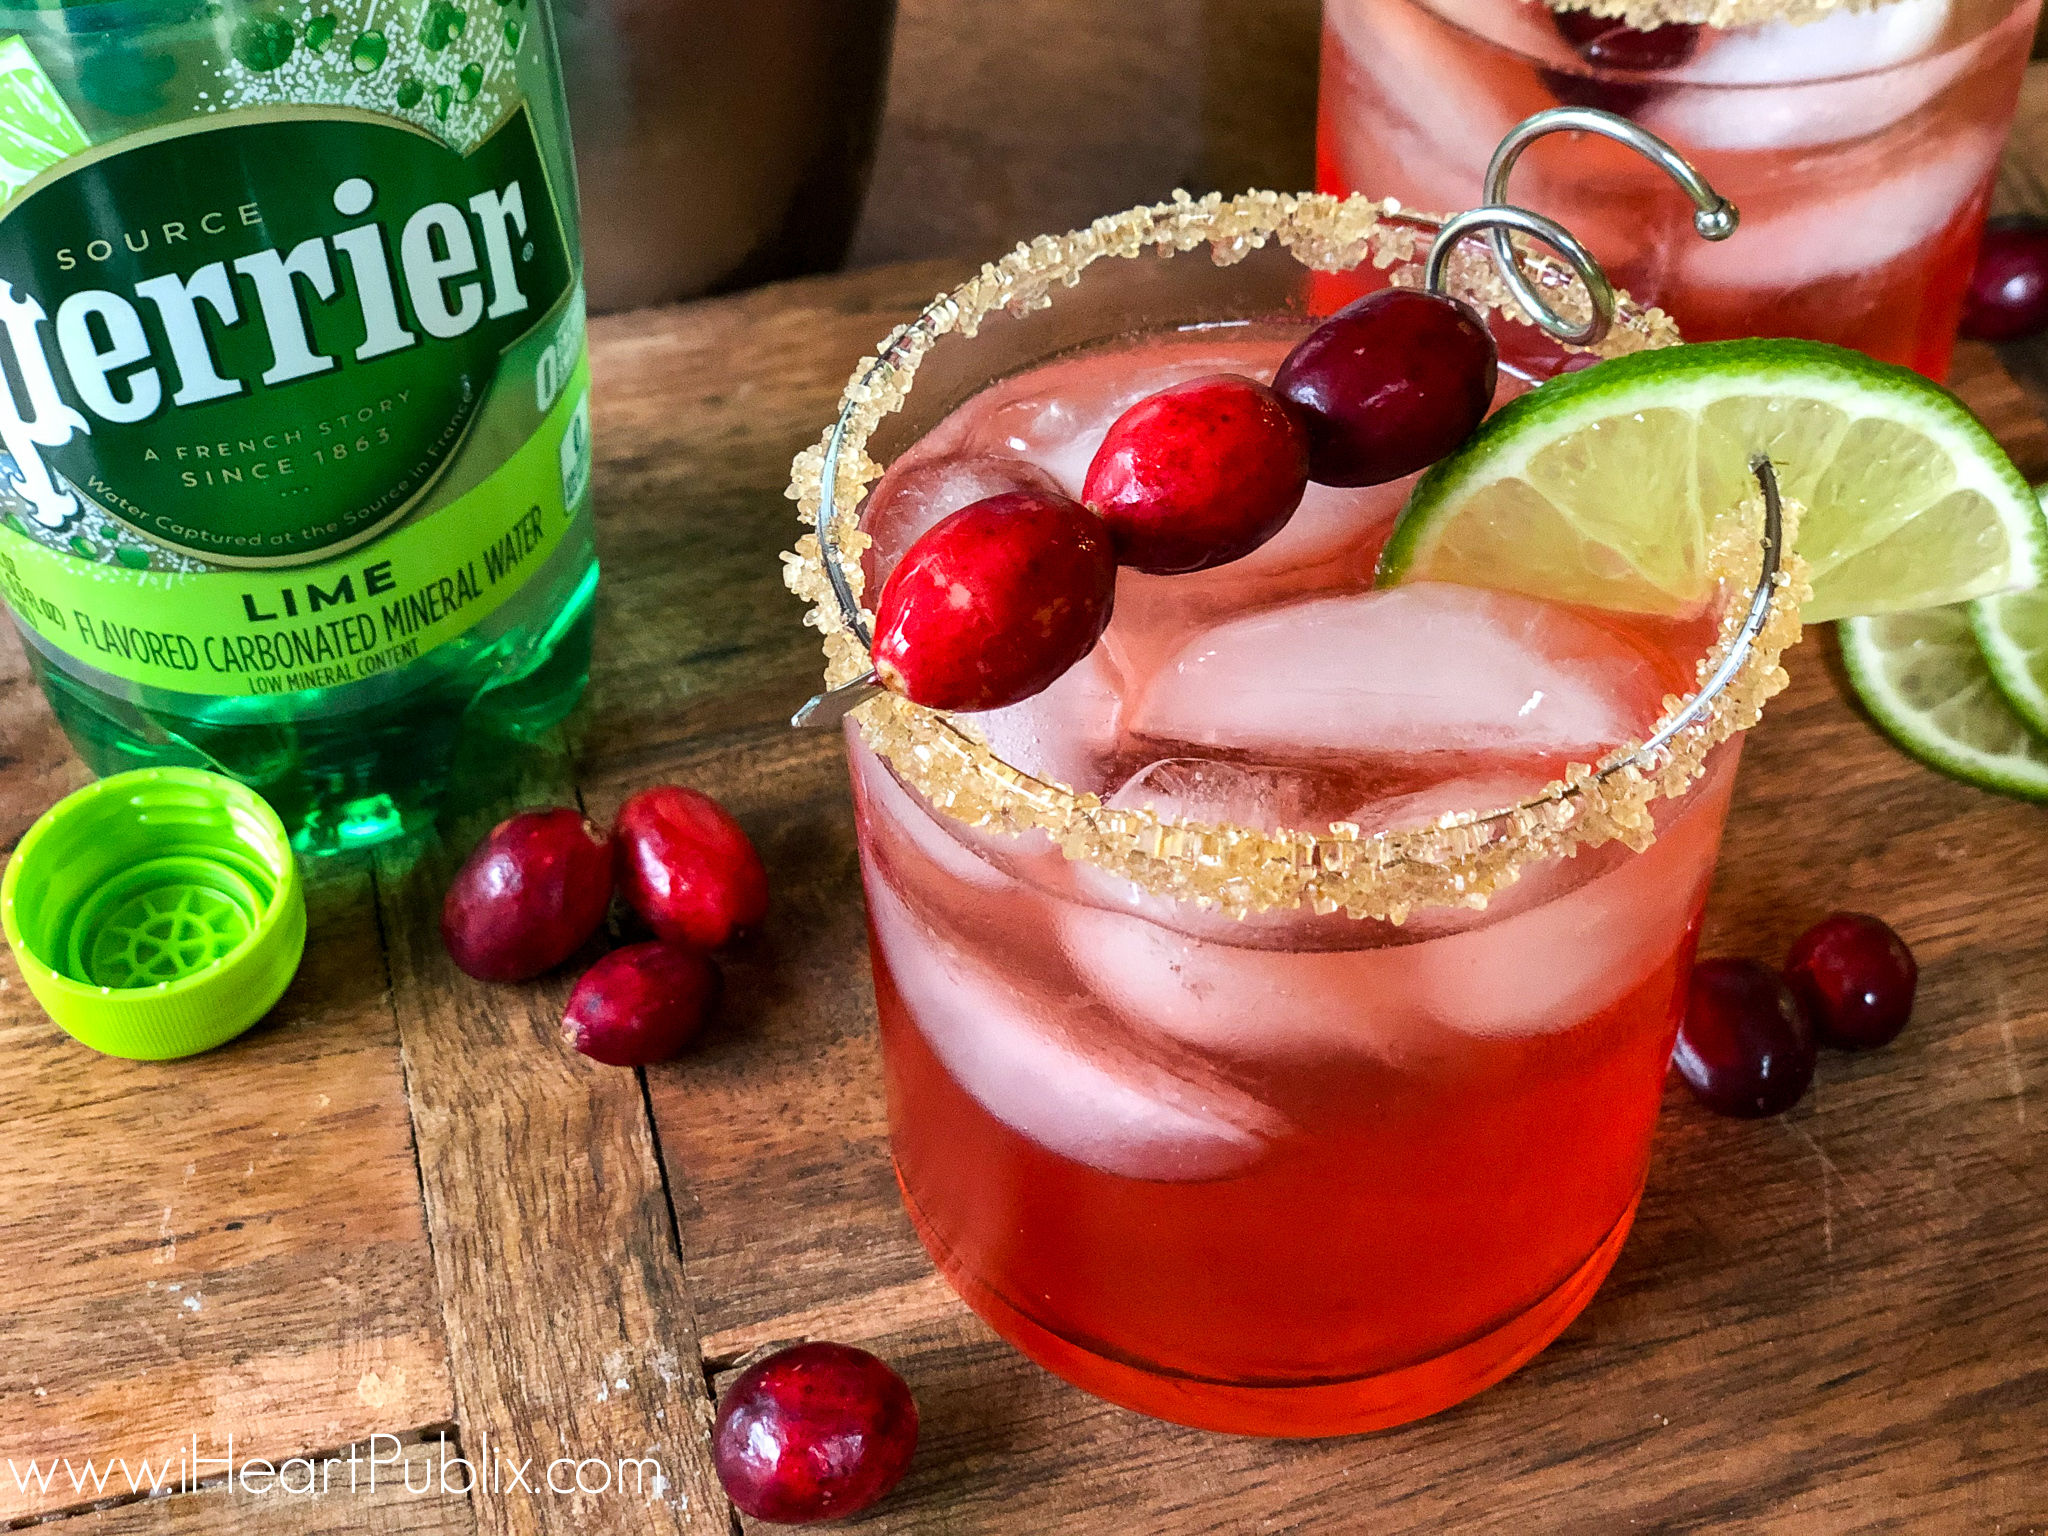 Try This Cranberry Lime Sparkle At Your Holiday Celebration - Look For PERRIER® On Sale Now At Publix on I Heart Publix